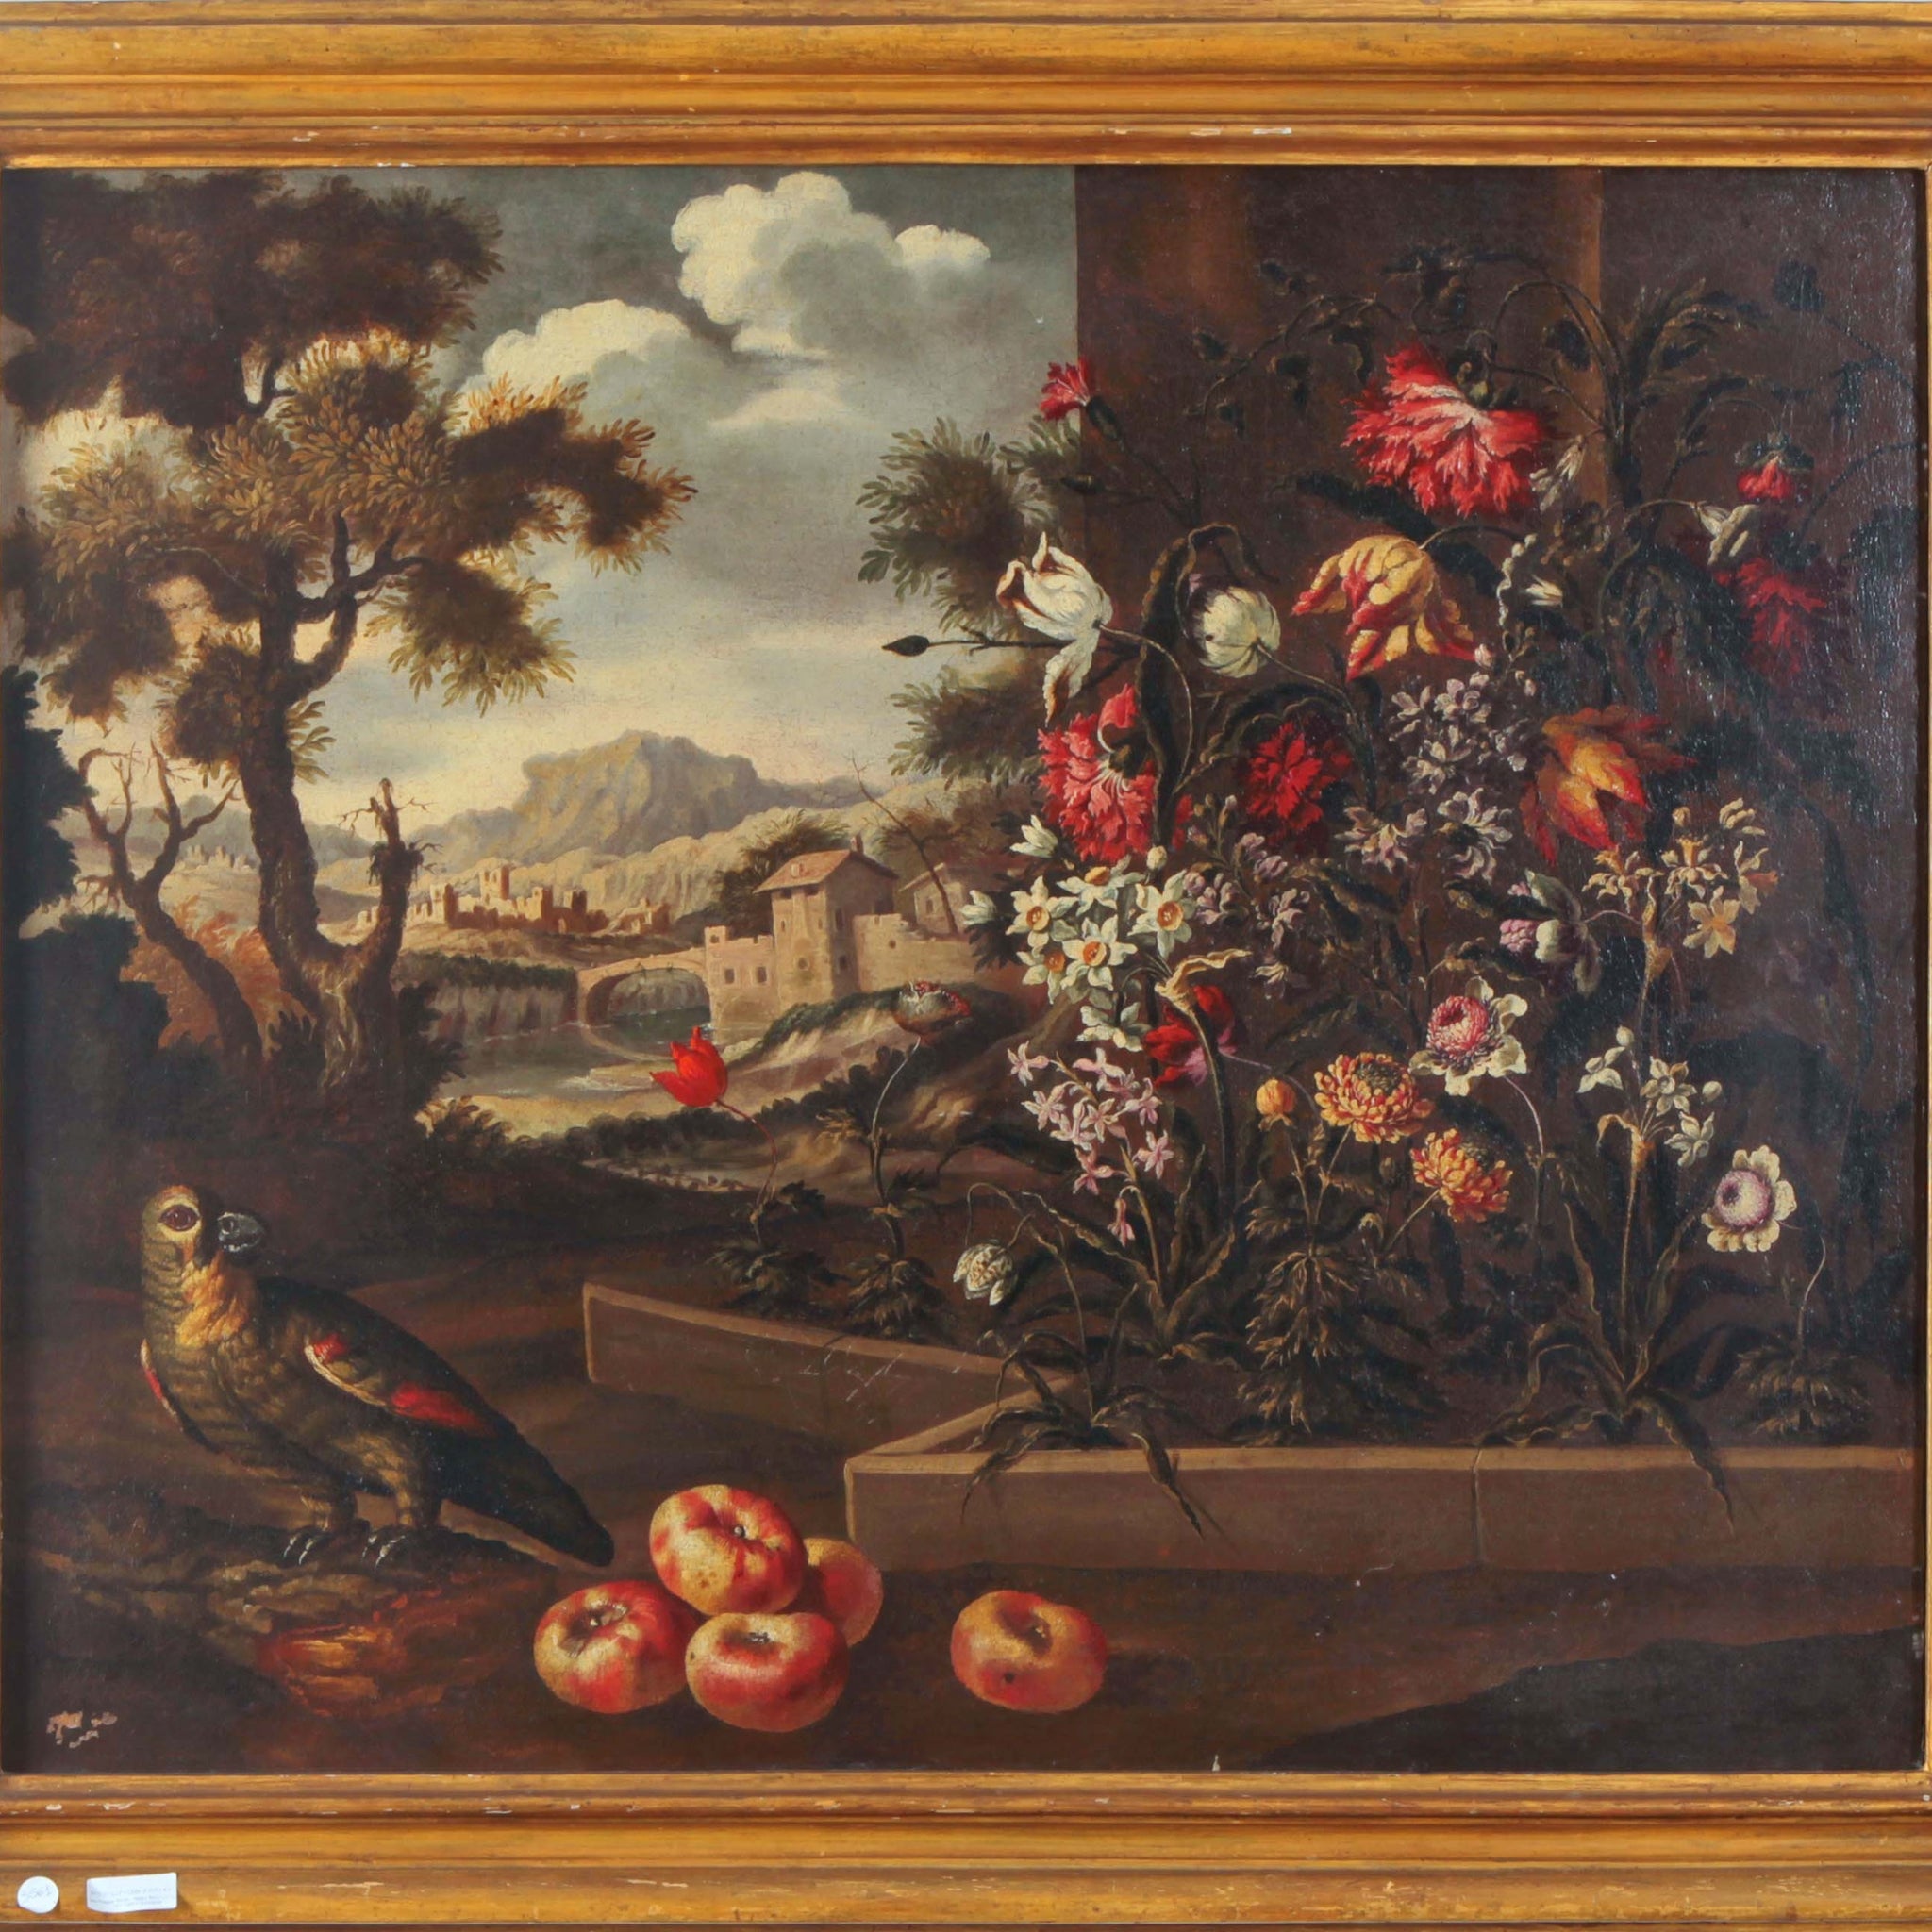 Ancient oil on canvas still life painting by Paolo Paoletti from 1600